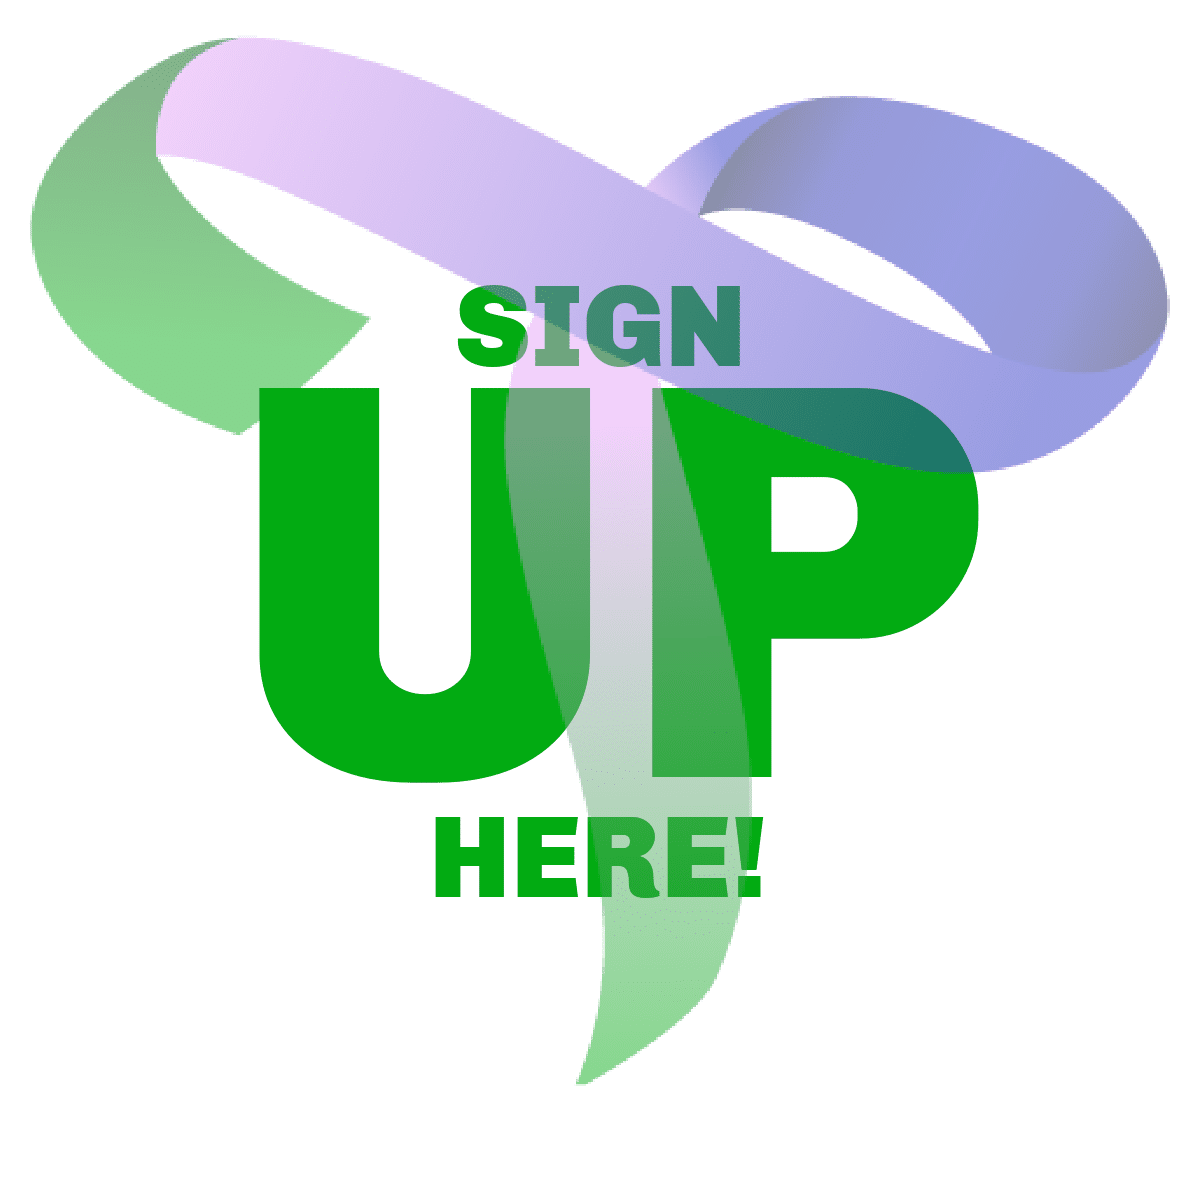 Sign up here logo